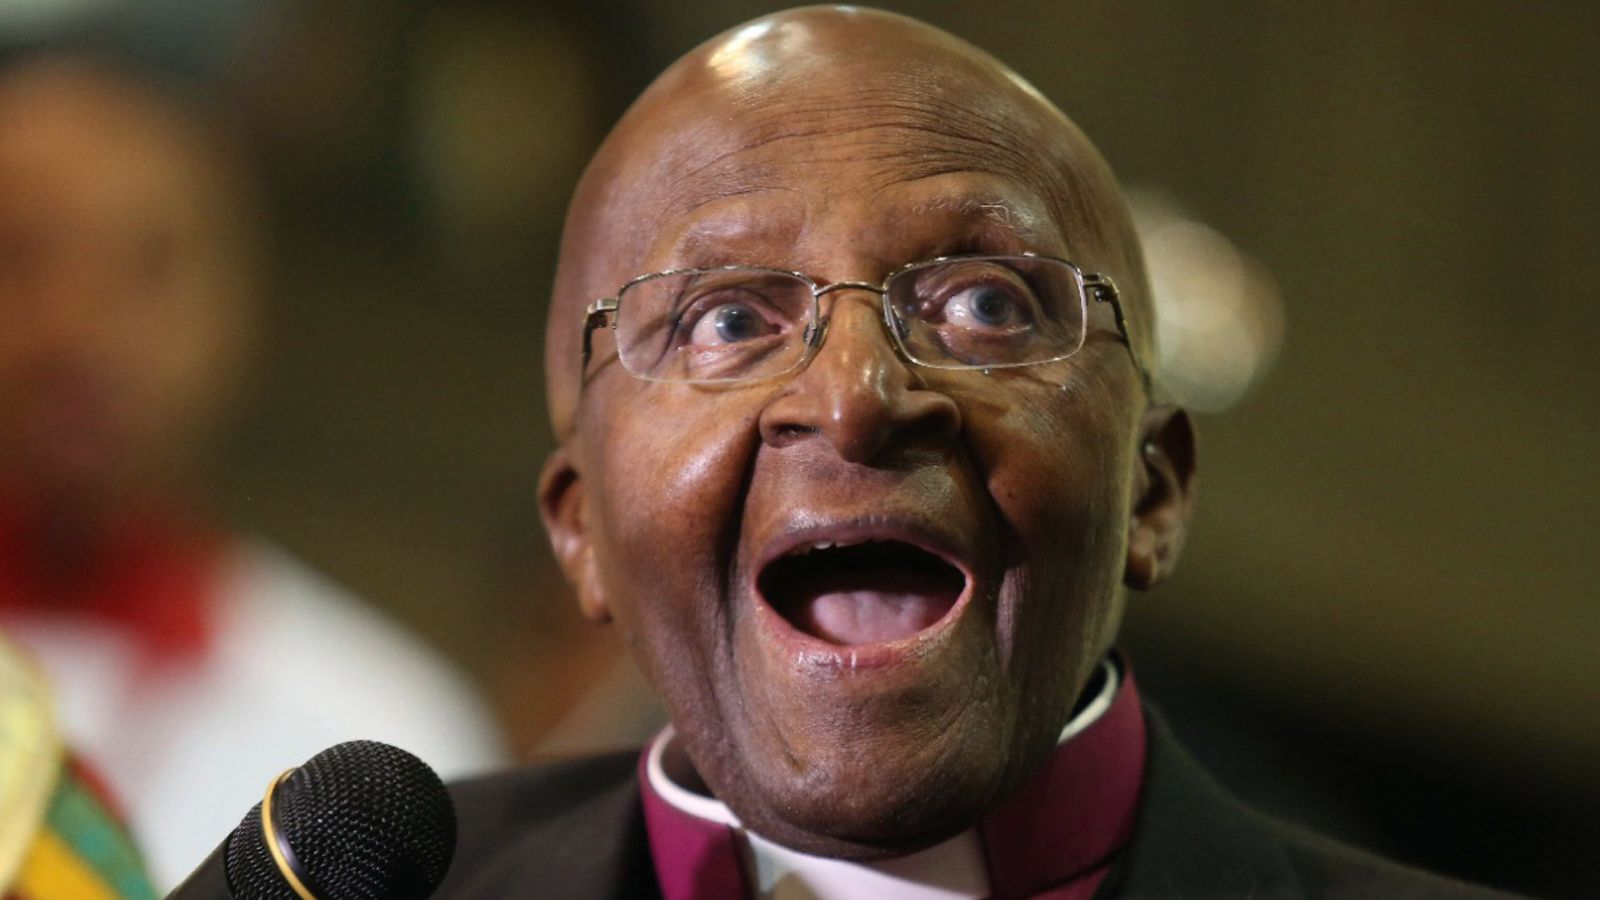 Anglican Archbishop Emeritus Desmond Tutu takes part in a Mass to celebrate four decades of episcopal ministry at a special thanksgiving Mass at St Mary's Cathedral in Johannesburg, July 20, 2016. Tutu, South Africa’s Nobel Peace Prize-winning activist for racial justice and LGBT rights and retired Anglican Archbishop of Cape Town, has died at the age of 90, South African President Cyril Ramaphosa has announced. (AP Photo/Denis Farrell, File)